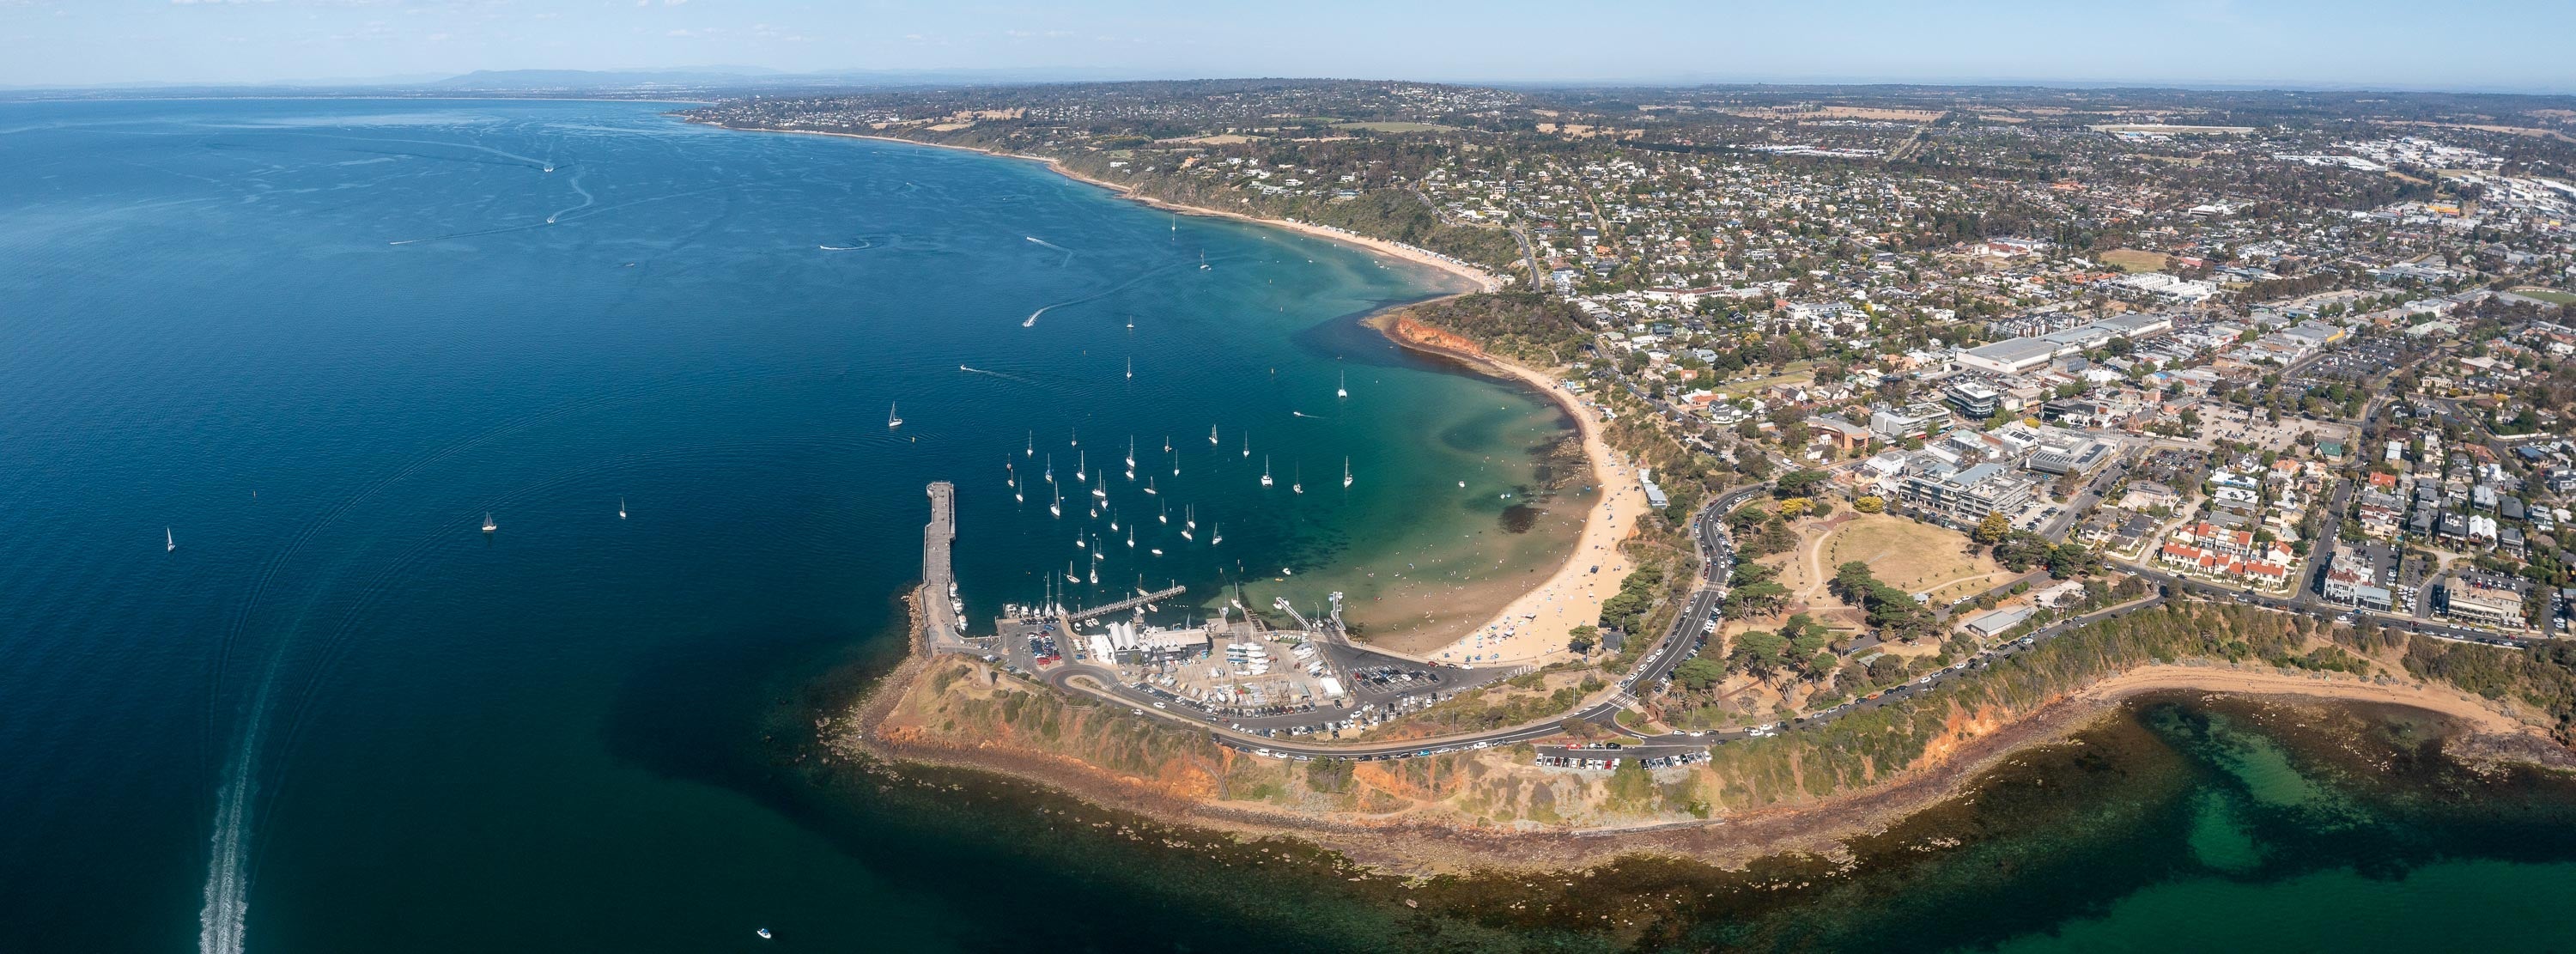 Mornington Harbour from above #2